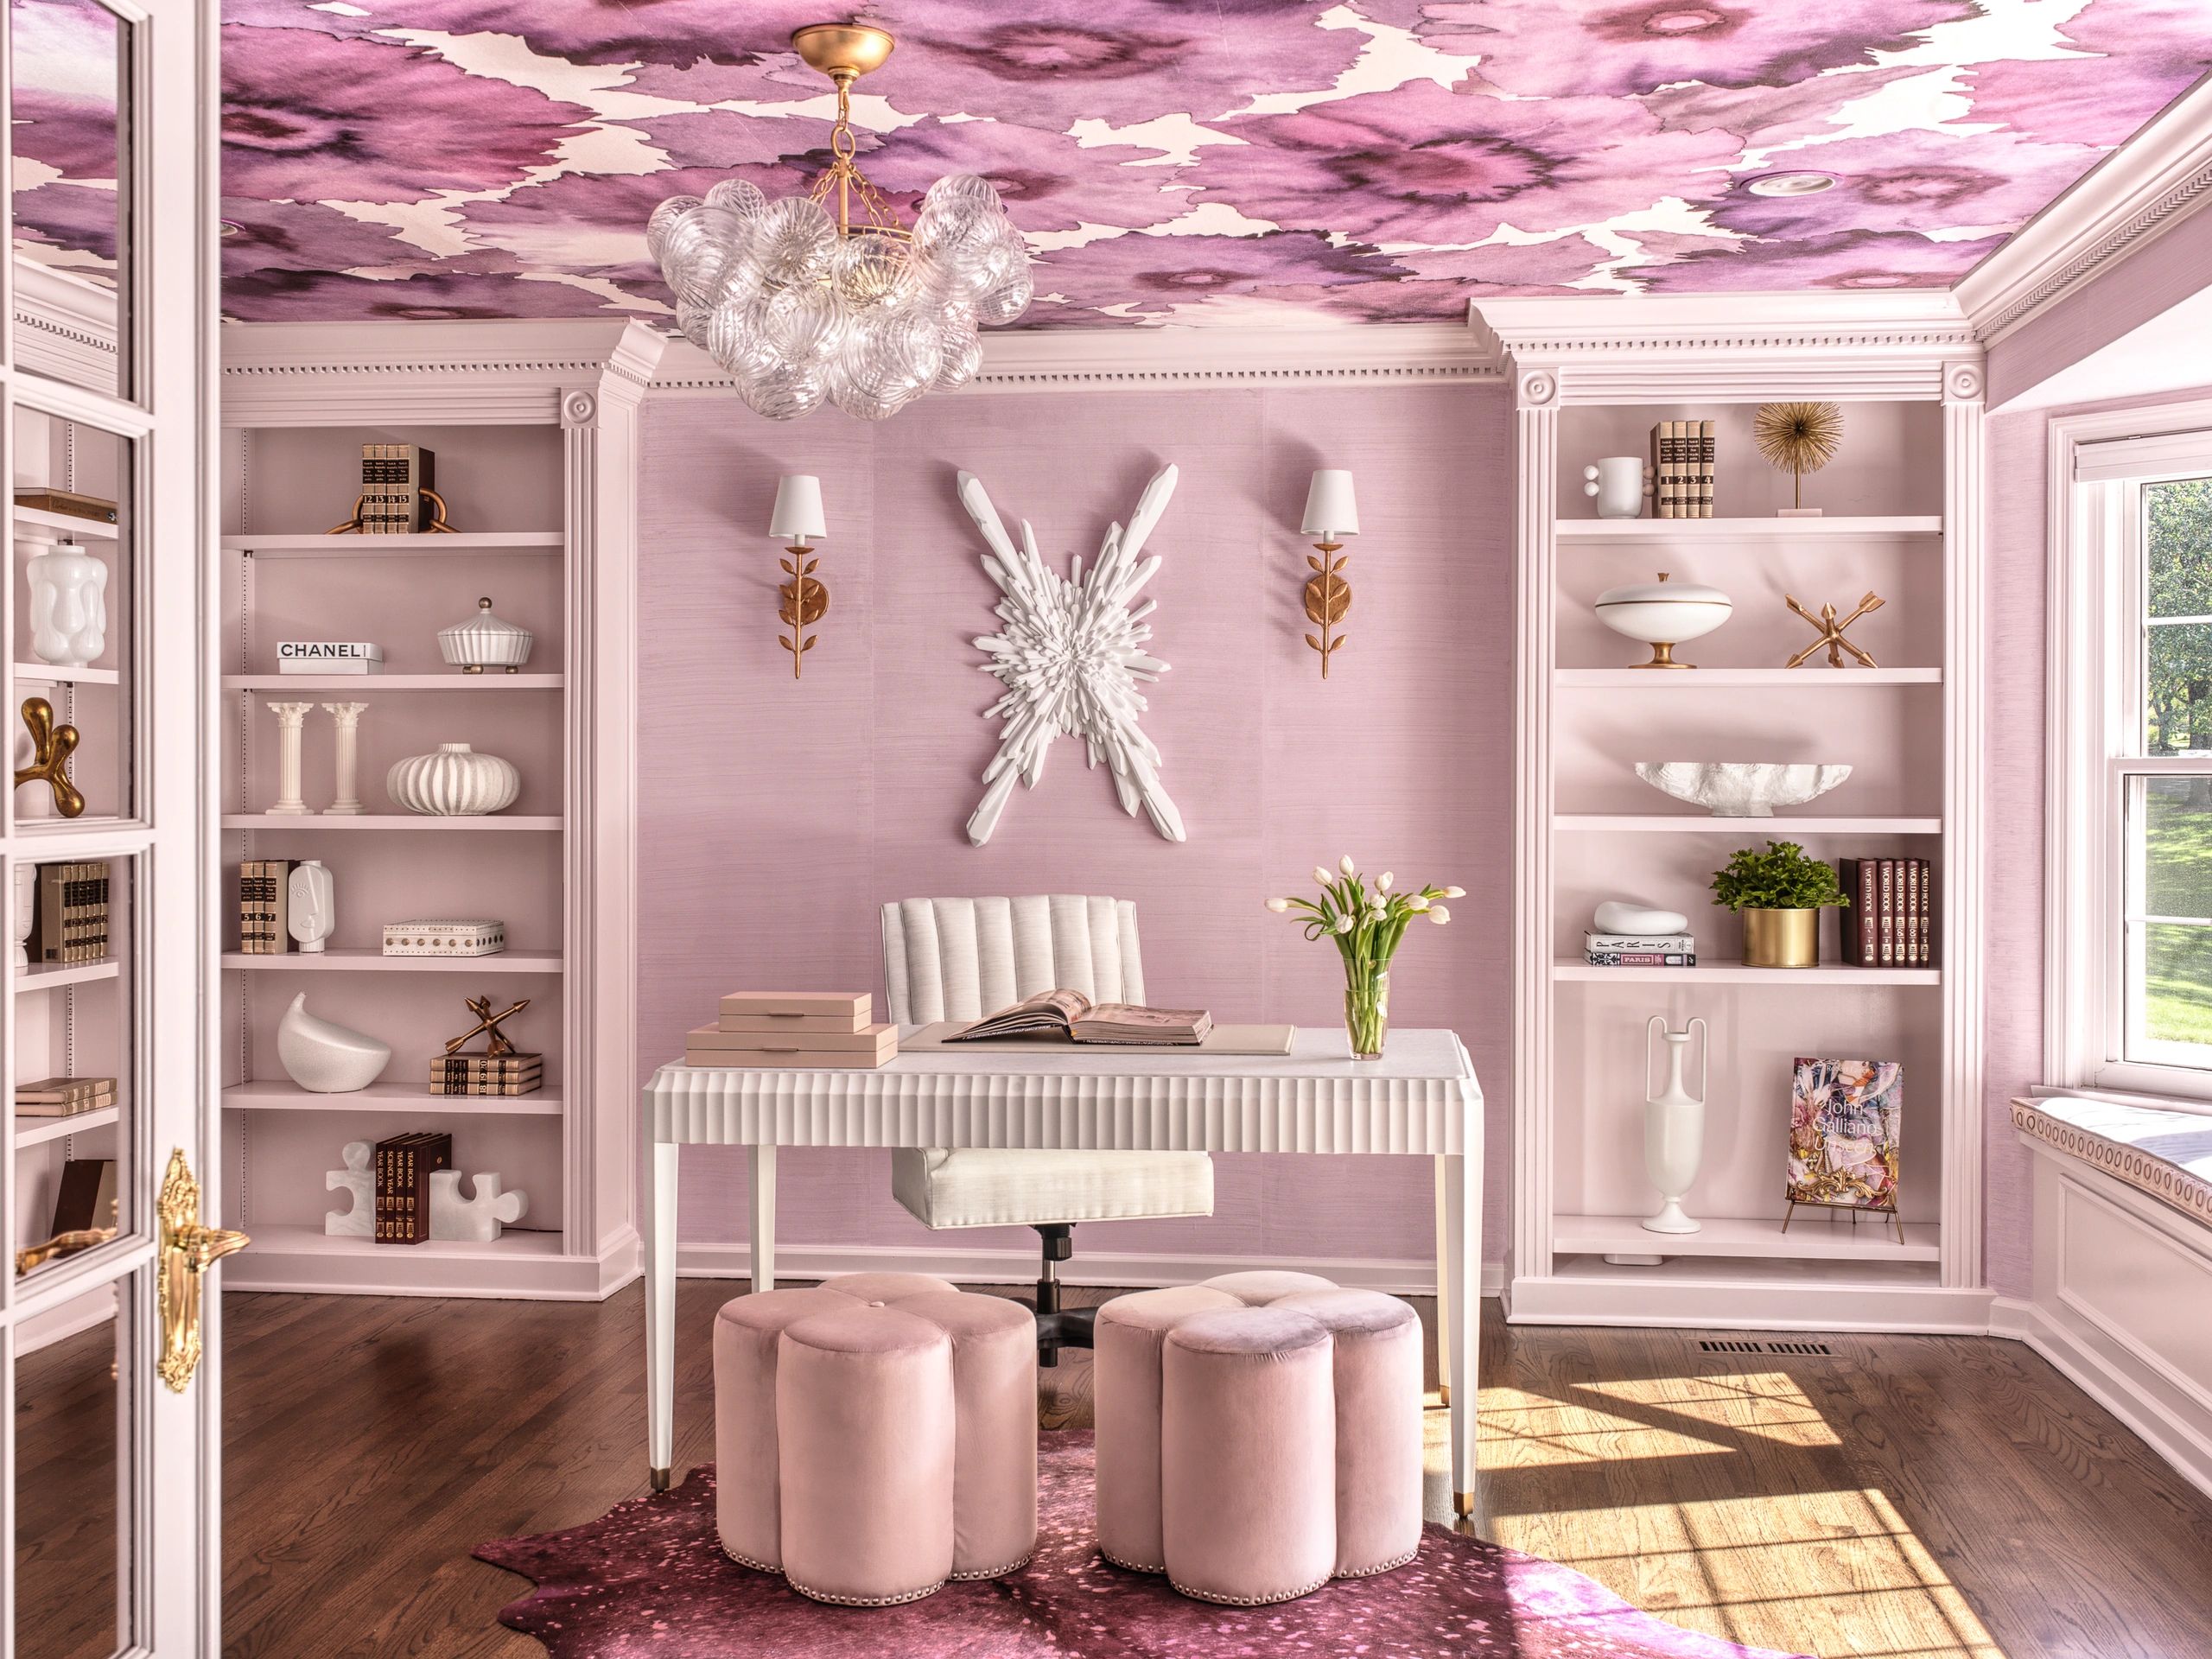 Home office with pink floral wallpaper on the ceiling. Bubble chandelier, white, marble desk.